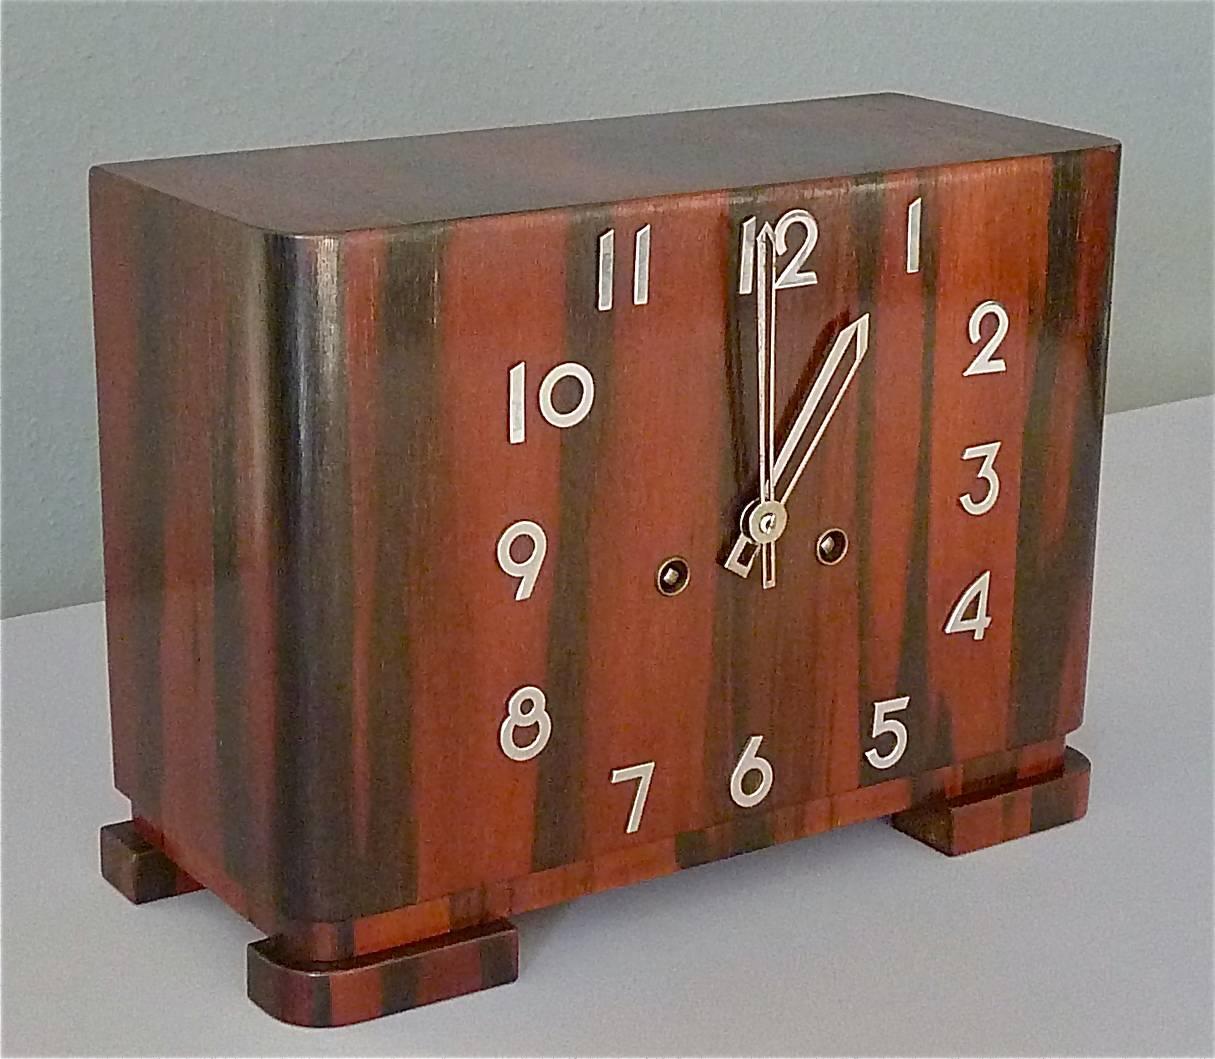 Awesome Art Deco / Bauhaus mantel desk clock made in Germany, circa 1925-1935 with attribution to Kienzle or Junghans in Germany. It is made of rosewood on a wood body with chromed numbers and hands. The modernist clock has a mechanic movement with